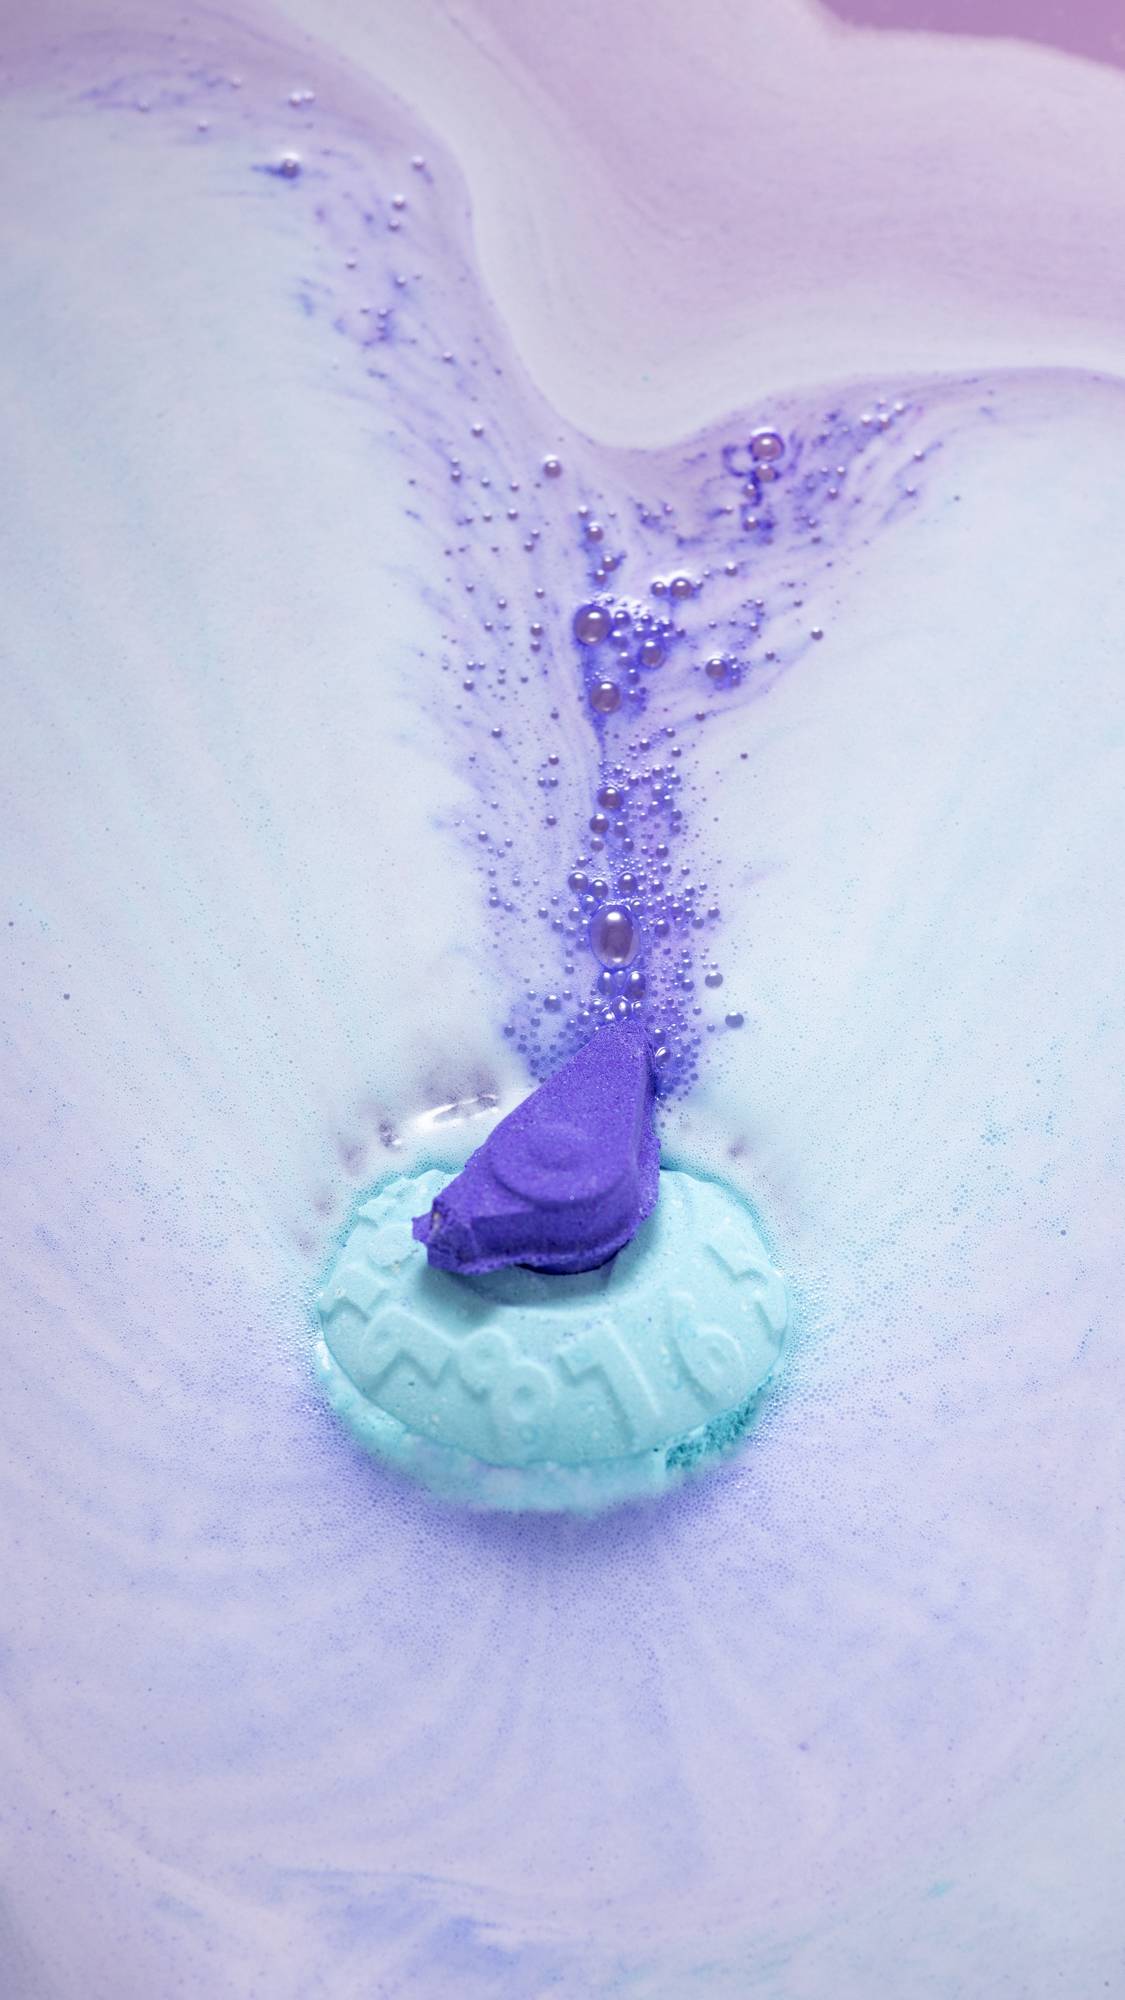 The Time To Relax bath bomb is dissolving leaving foamy swirls of blue and purple. 